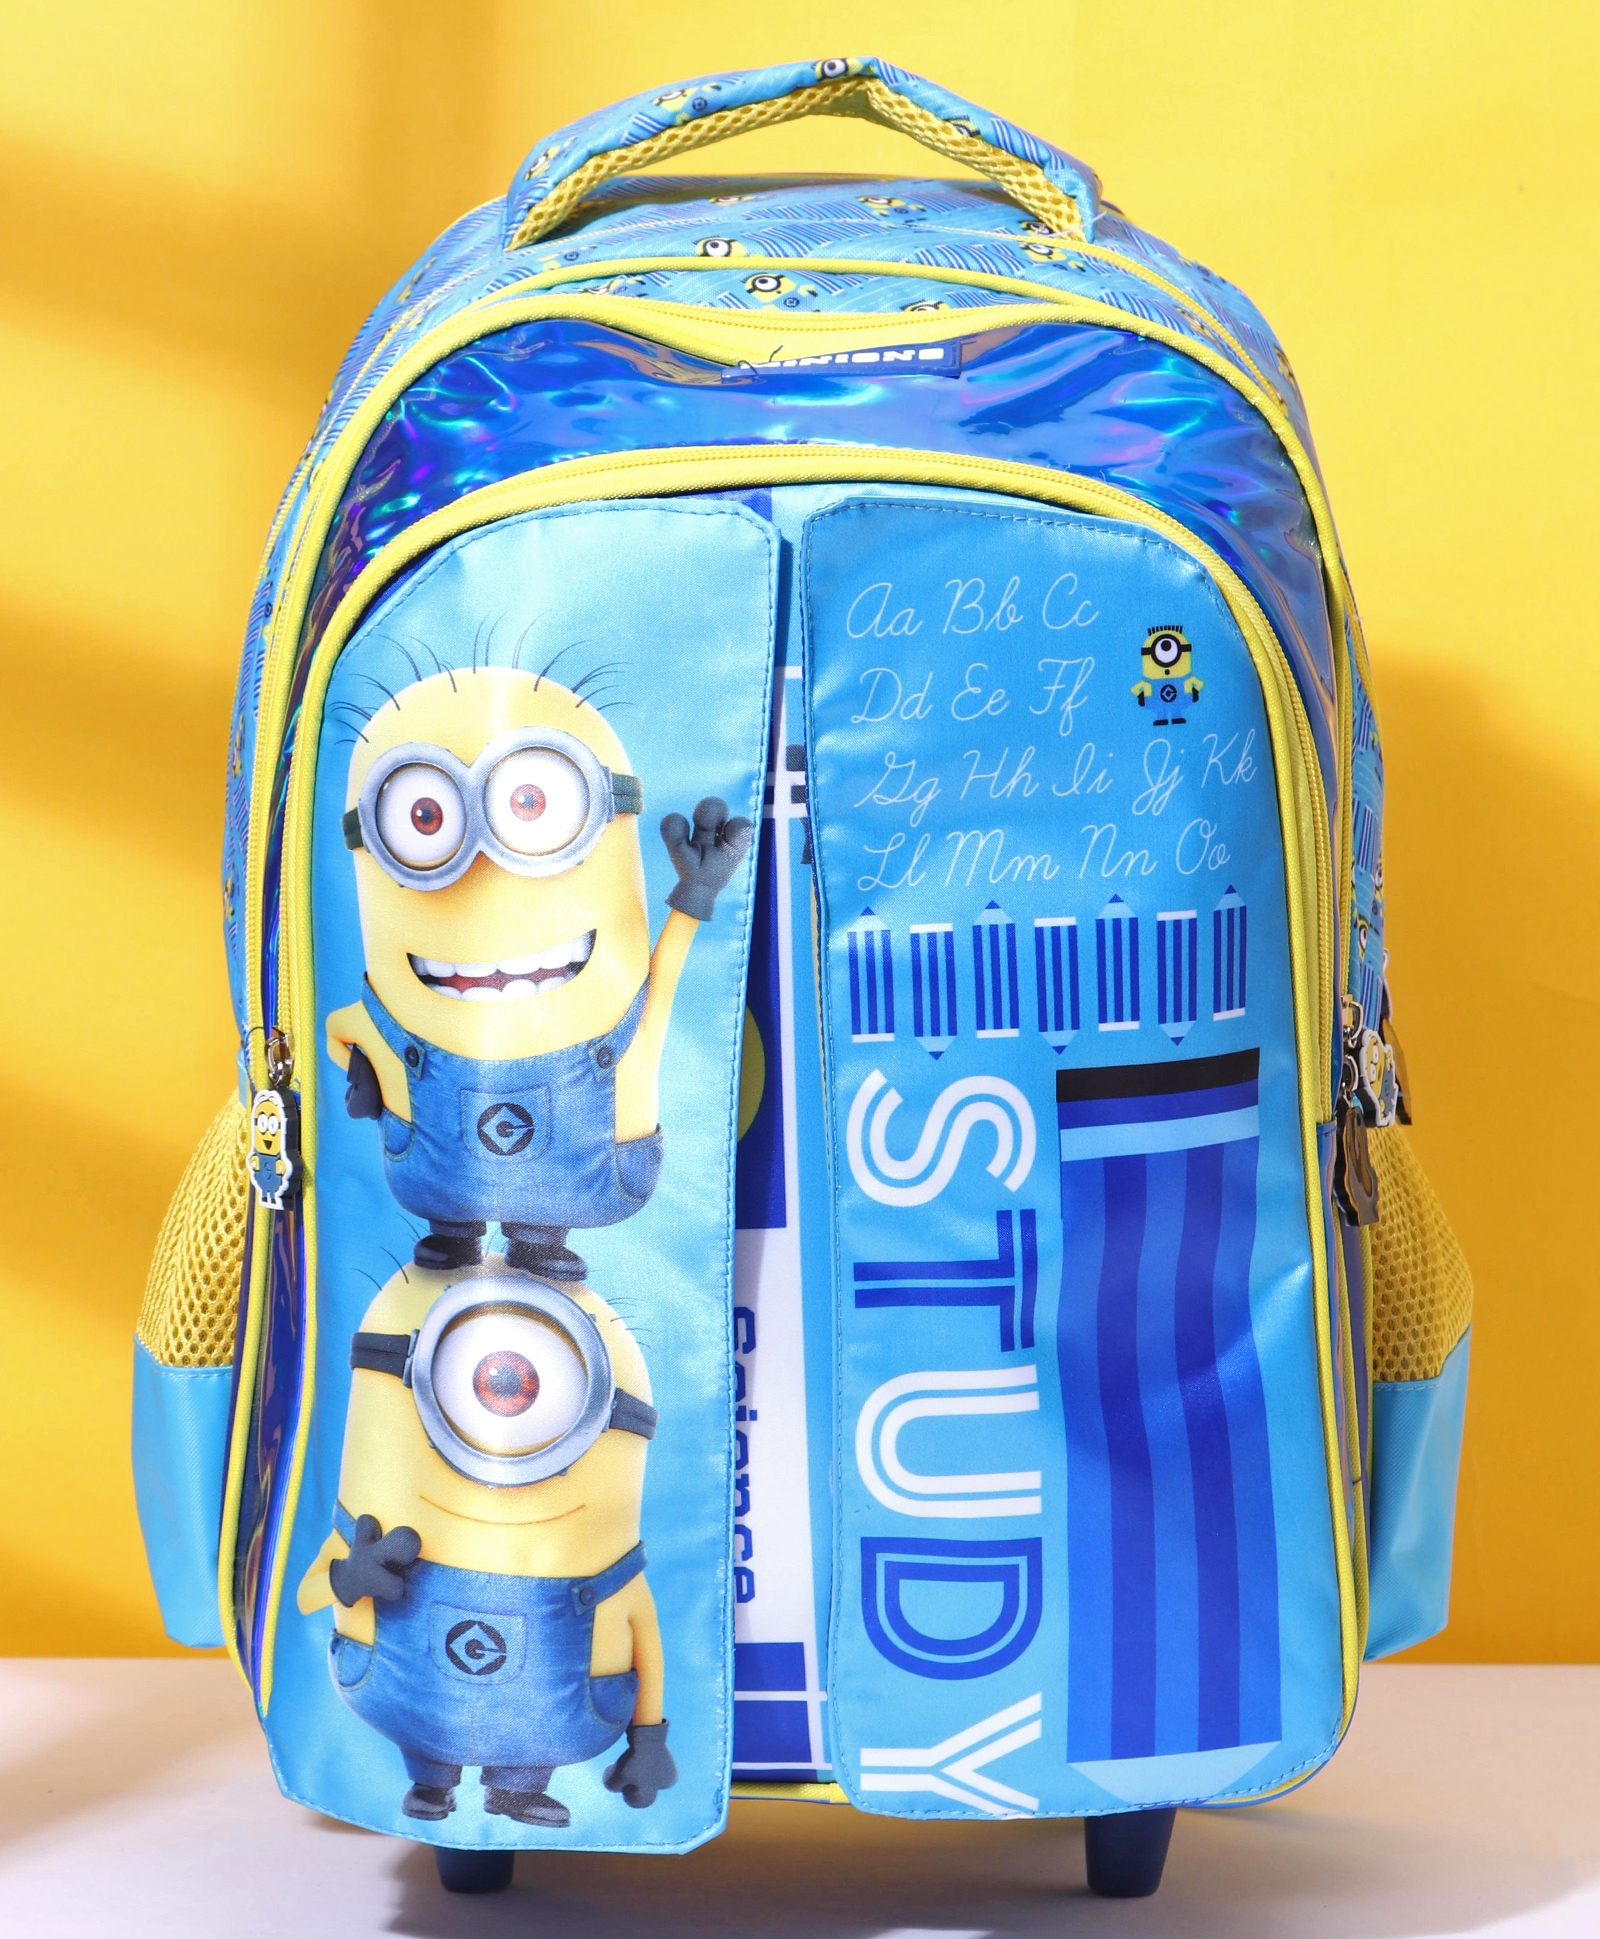 16 Despicable Me Minions 3D ABS Luggage Trolley Spinner Carryon Suitcase Travel Bag blue jean suspender 